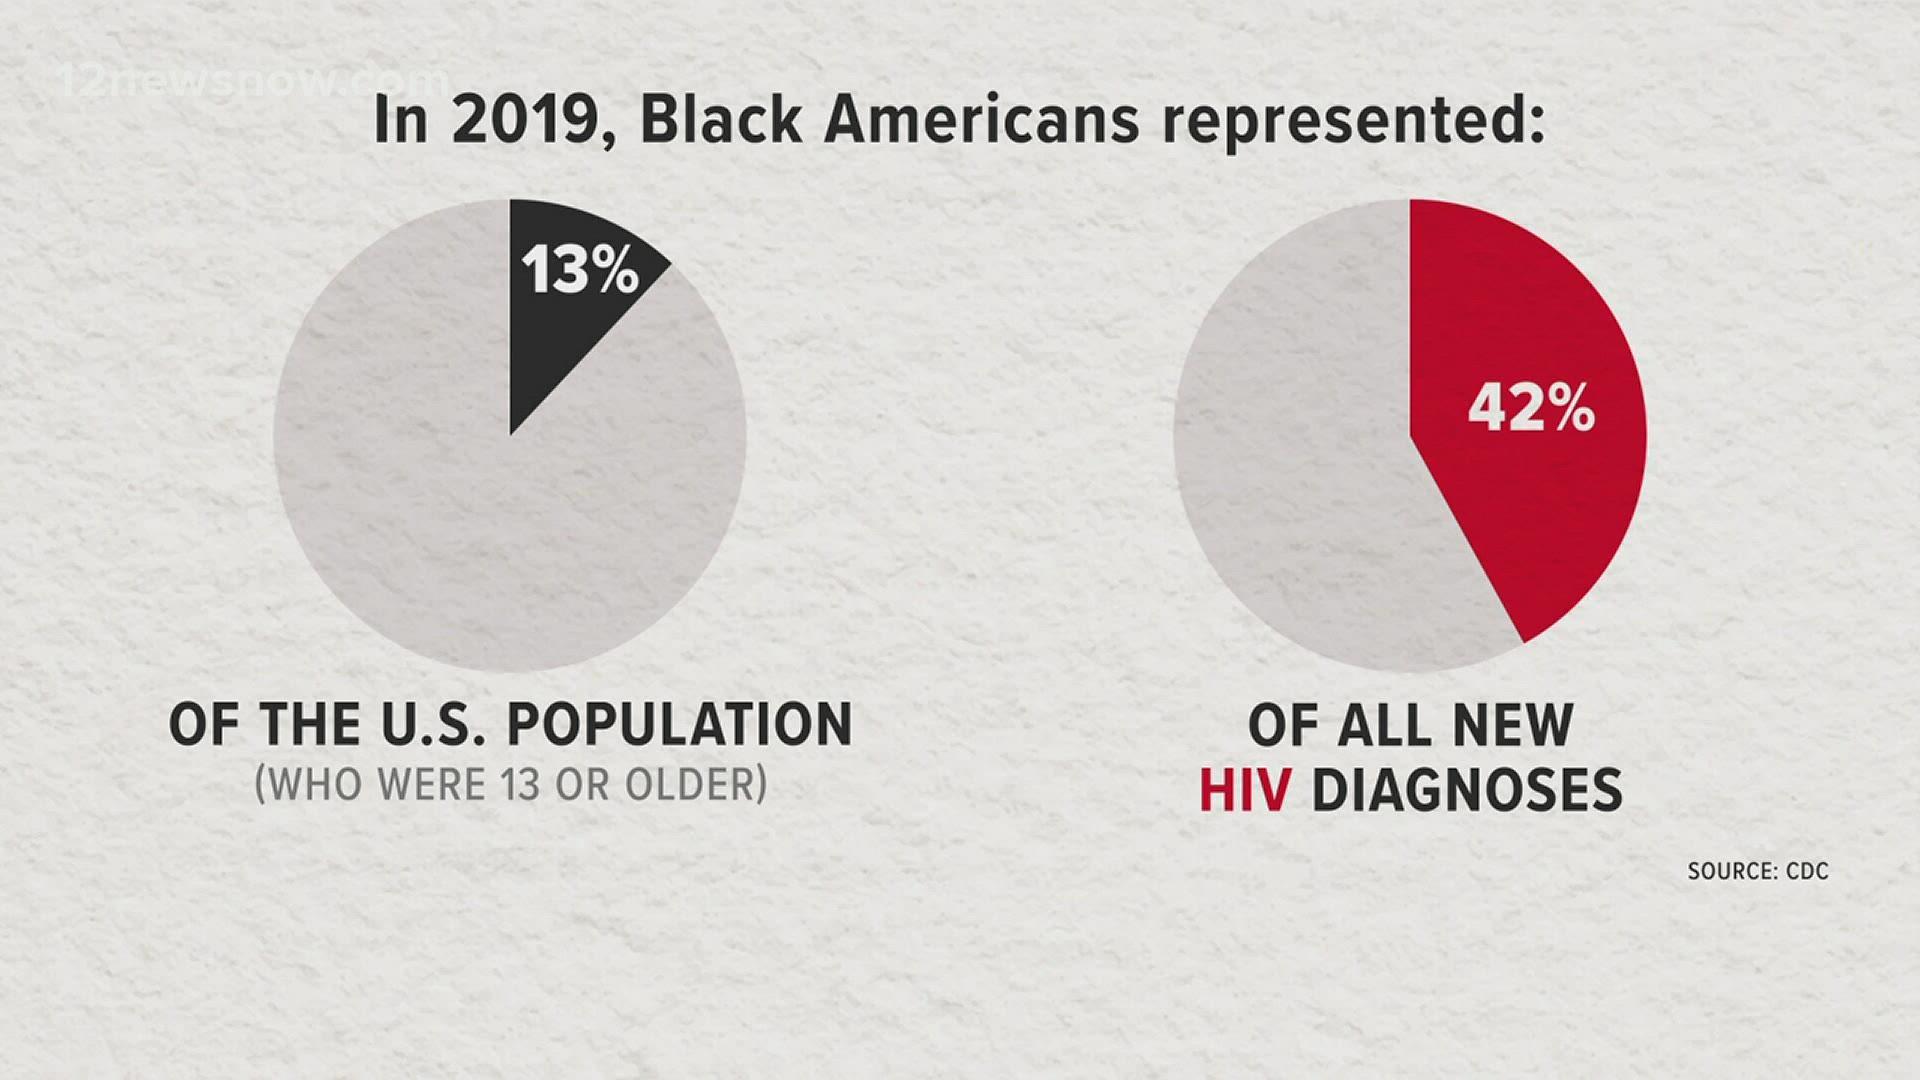 Multiple Southeast Texas health clinics are focusing on access to HIV education, testing, treatment and prevention for the Black community.